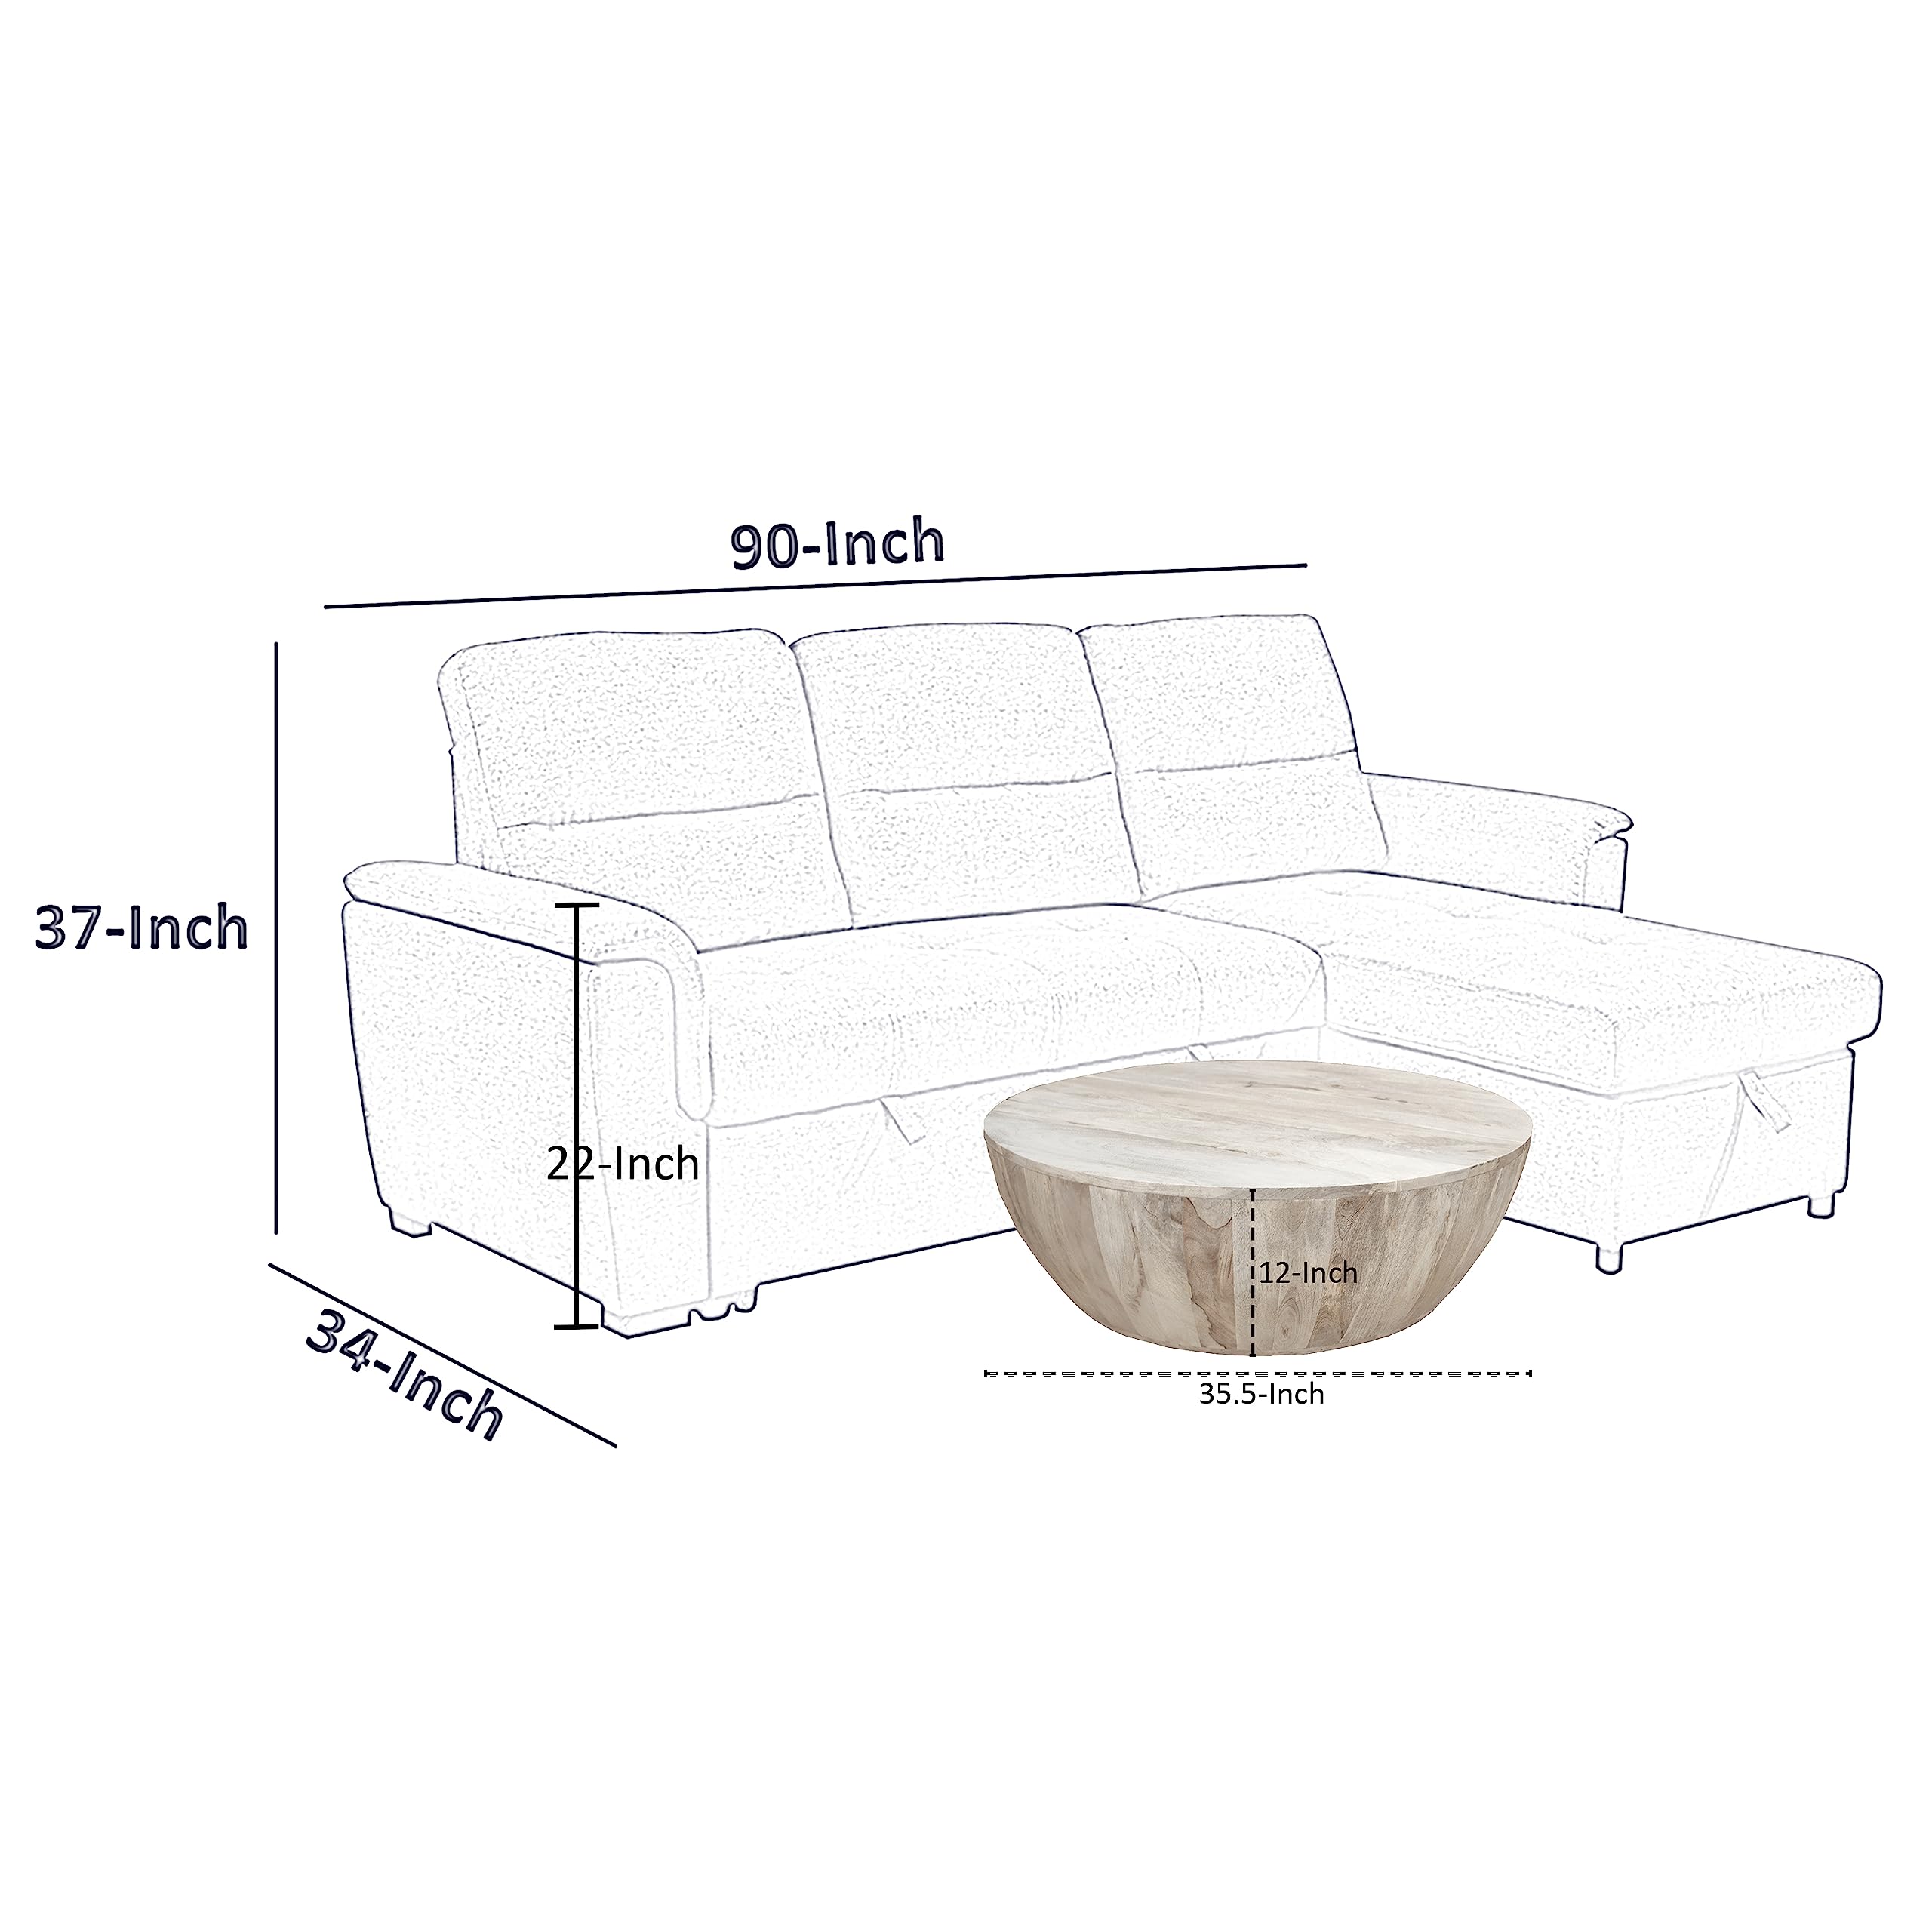 The Urban Port 12-Inch Height Round Mango Wood Coffee Table, Subtle Grains, Distressed White